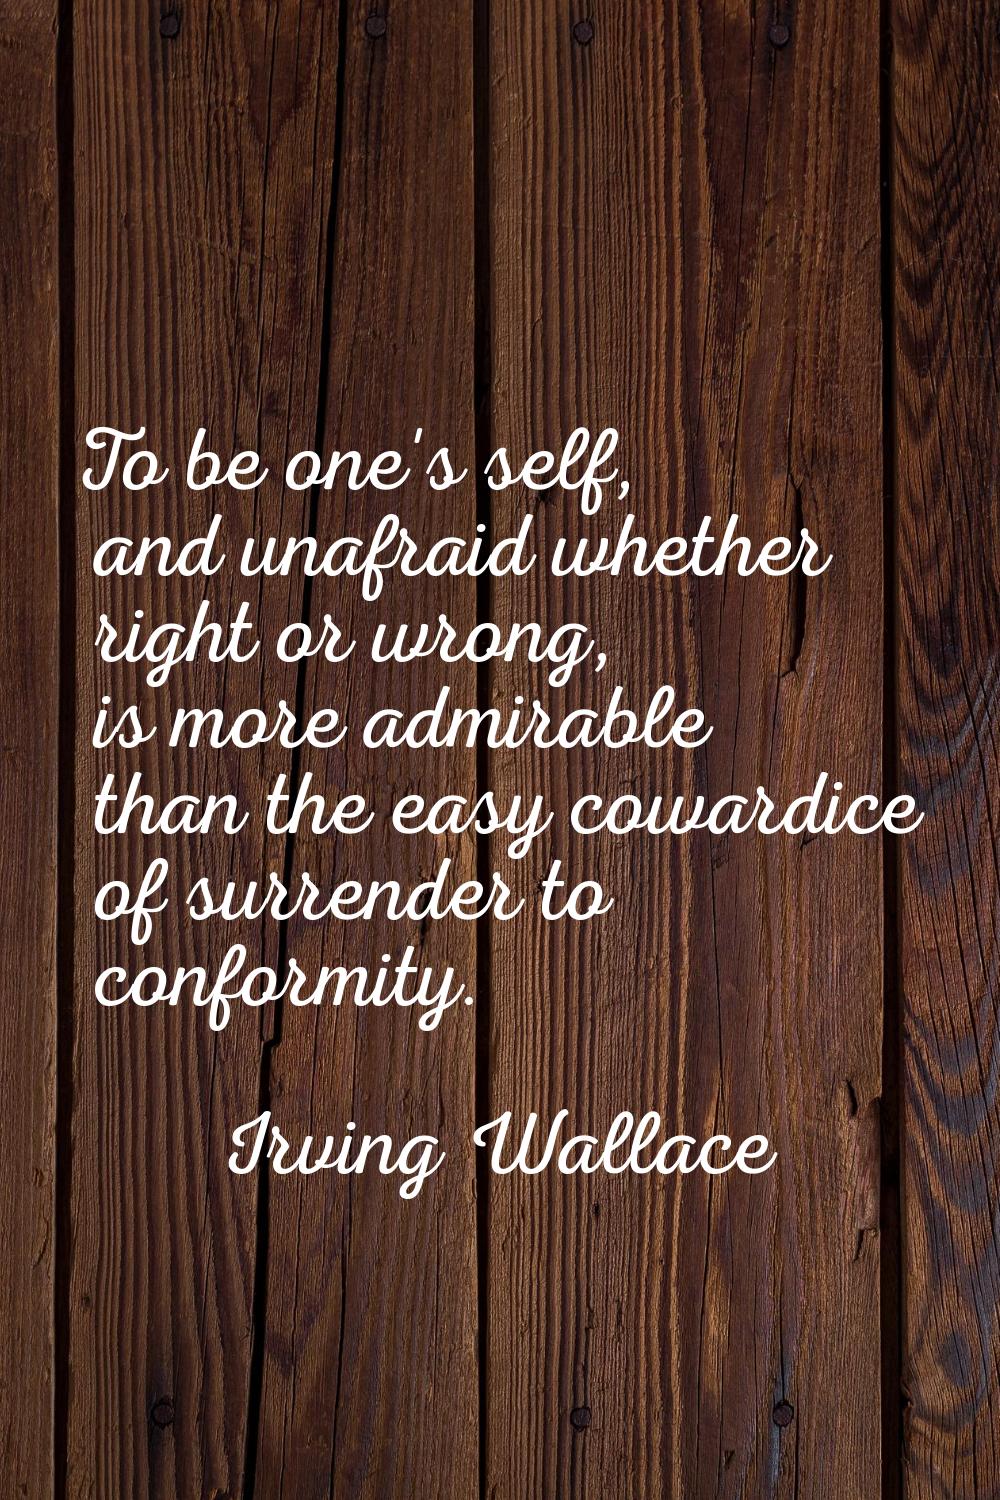 To be one's self, and unafraid whether right or wrong, is more admirable than the easy cowardice of